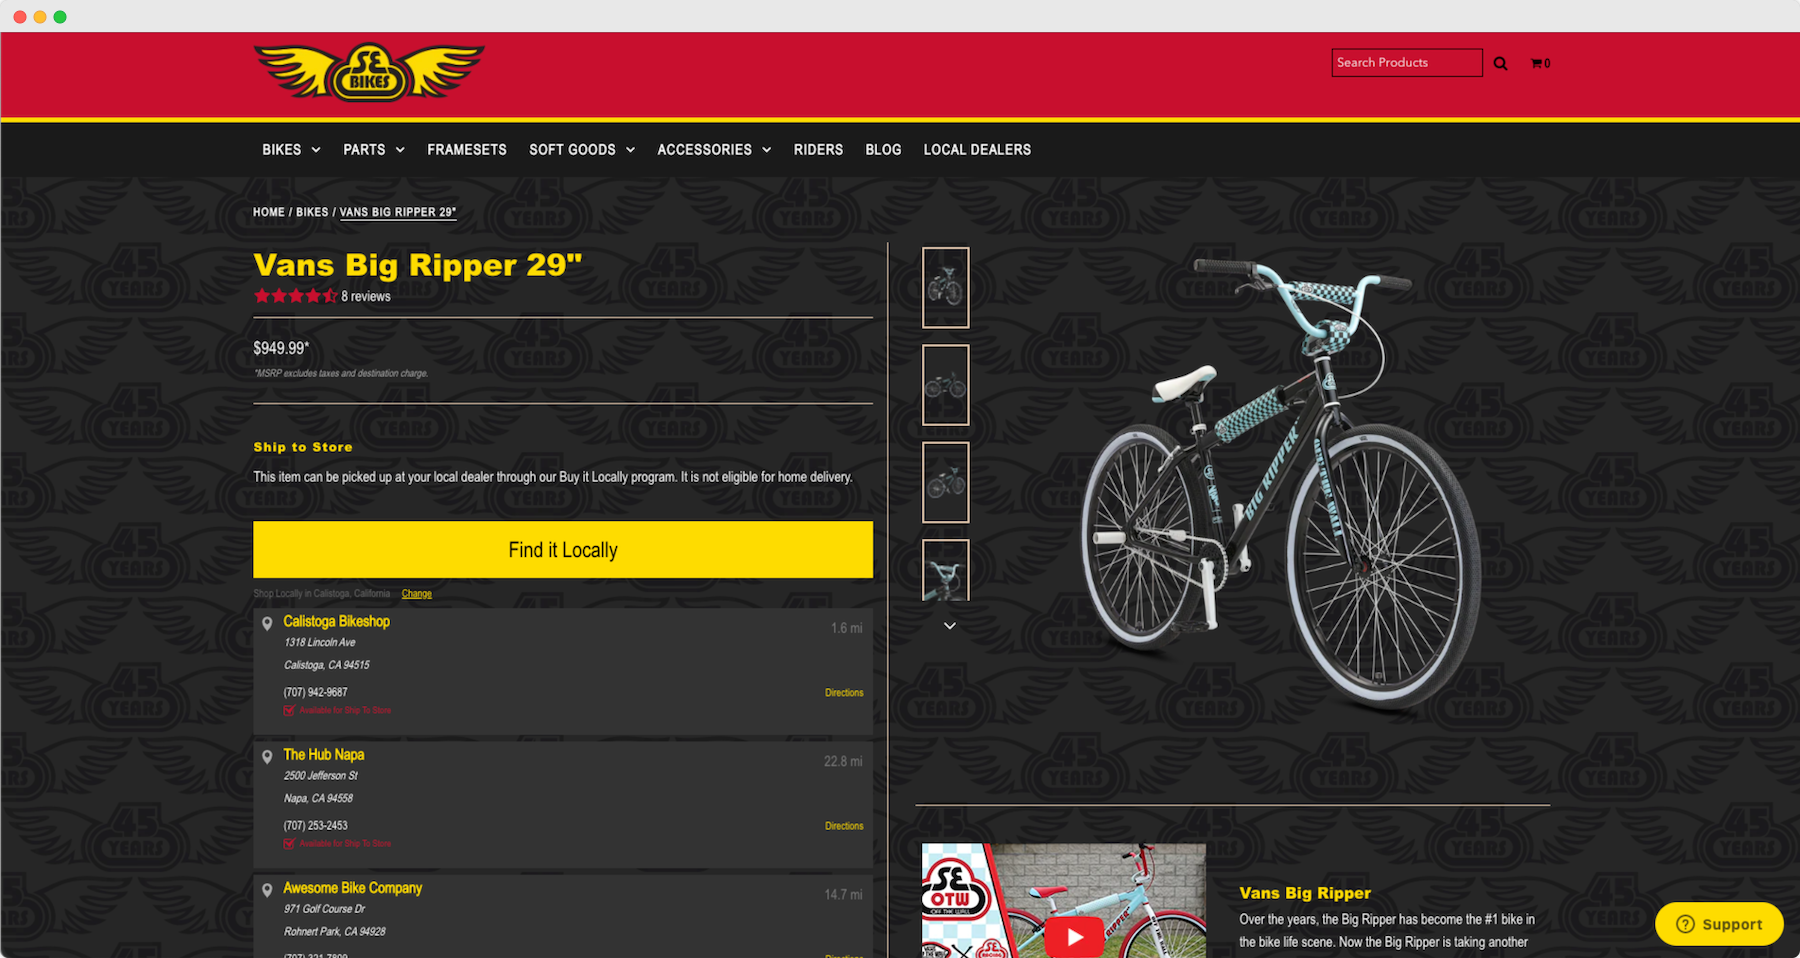 Locally SE Bikes Launches Special Product Drops Using Locally Ship to Store